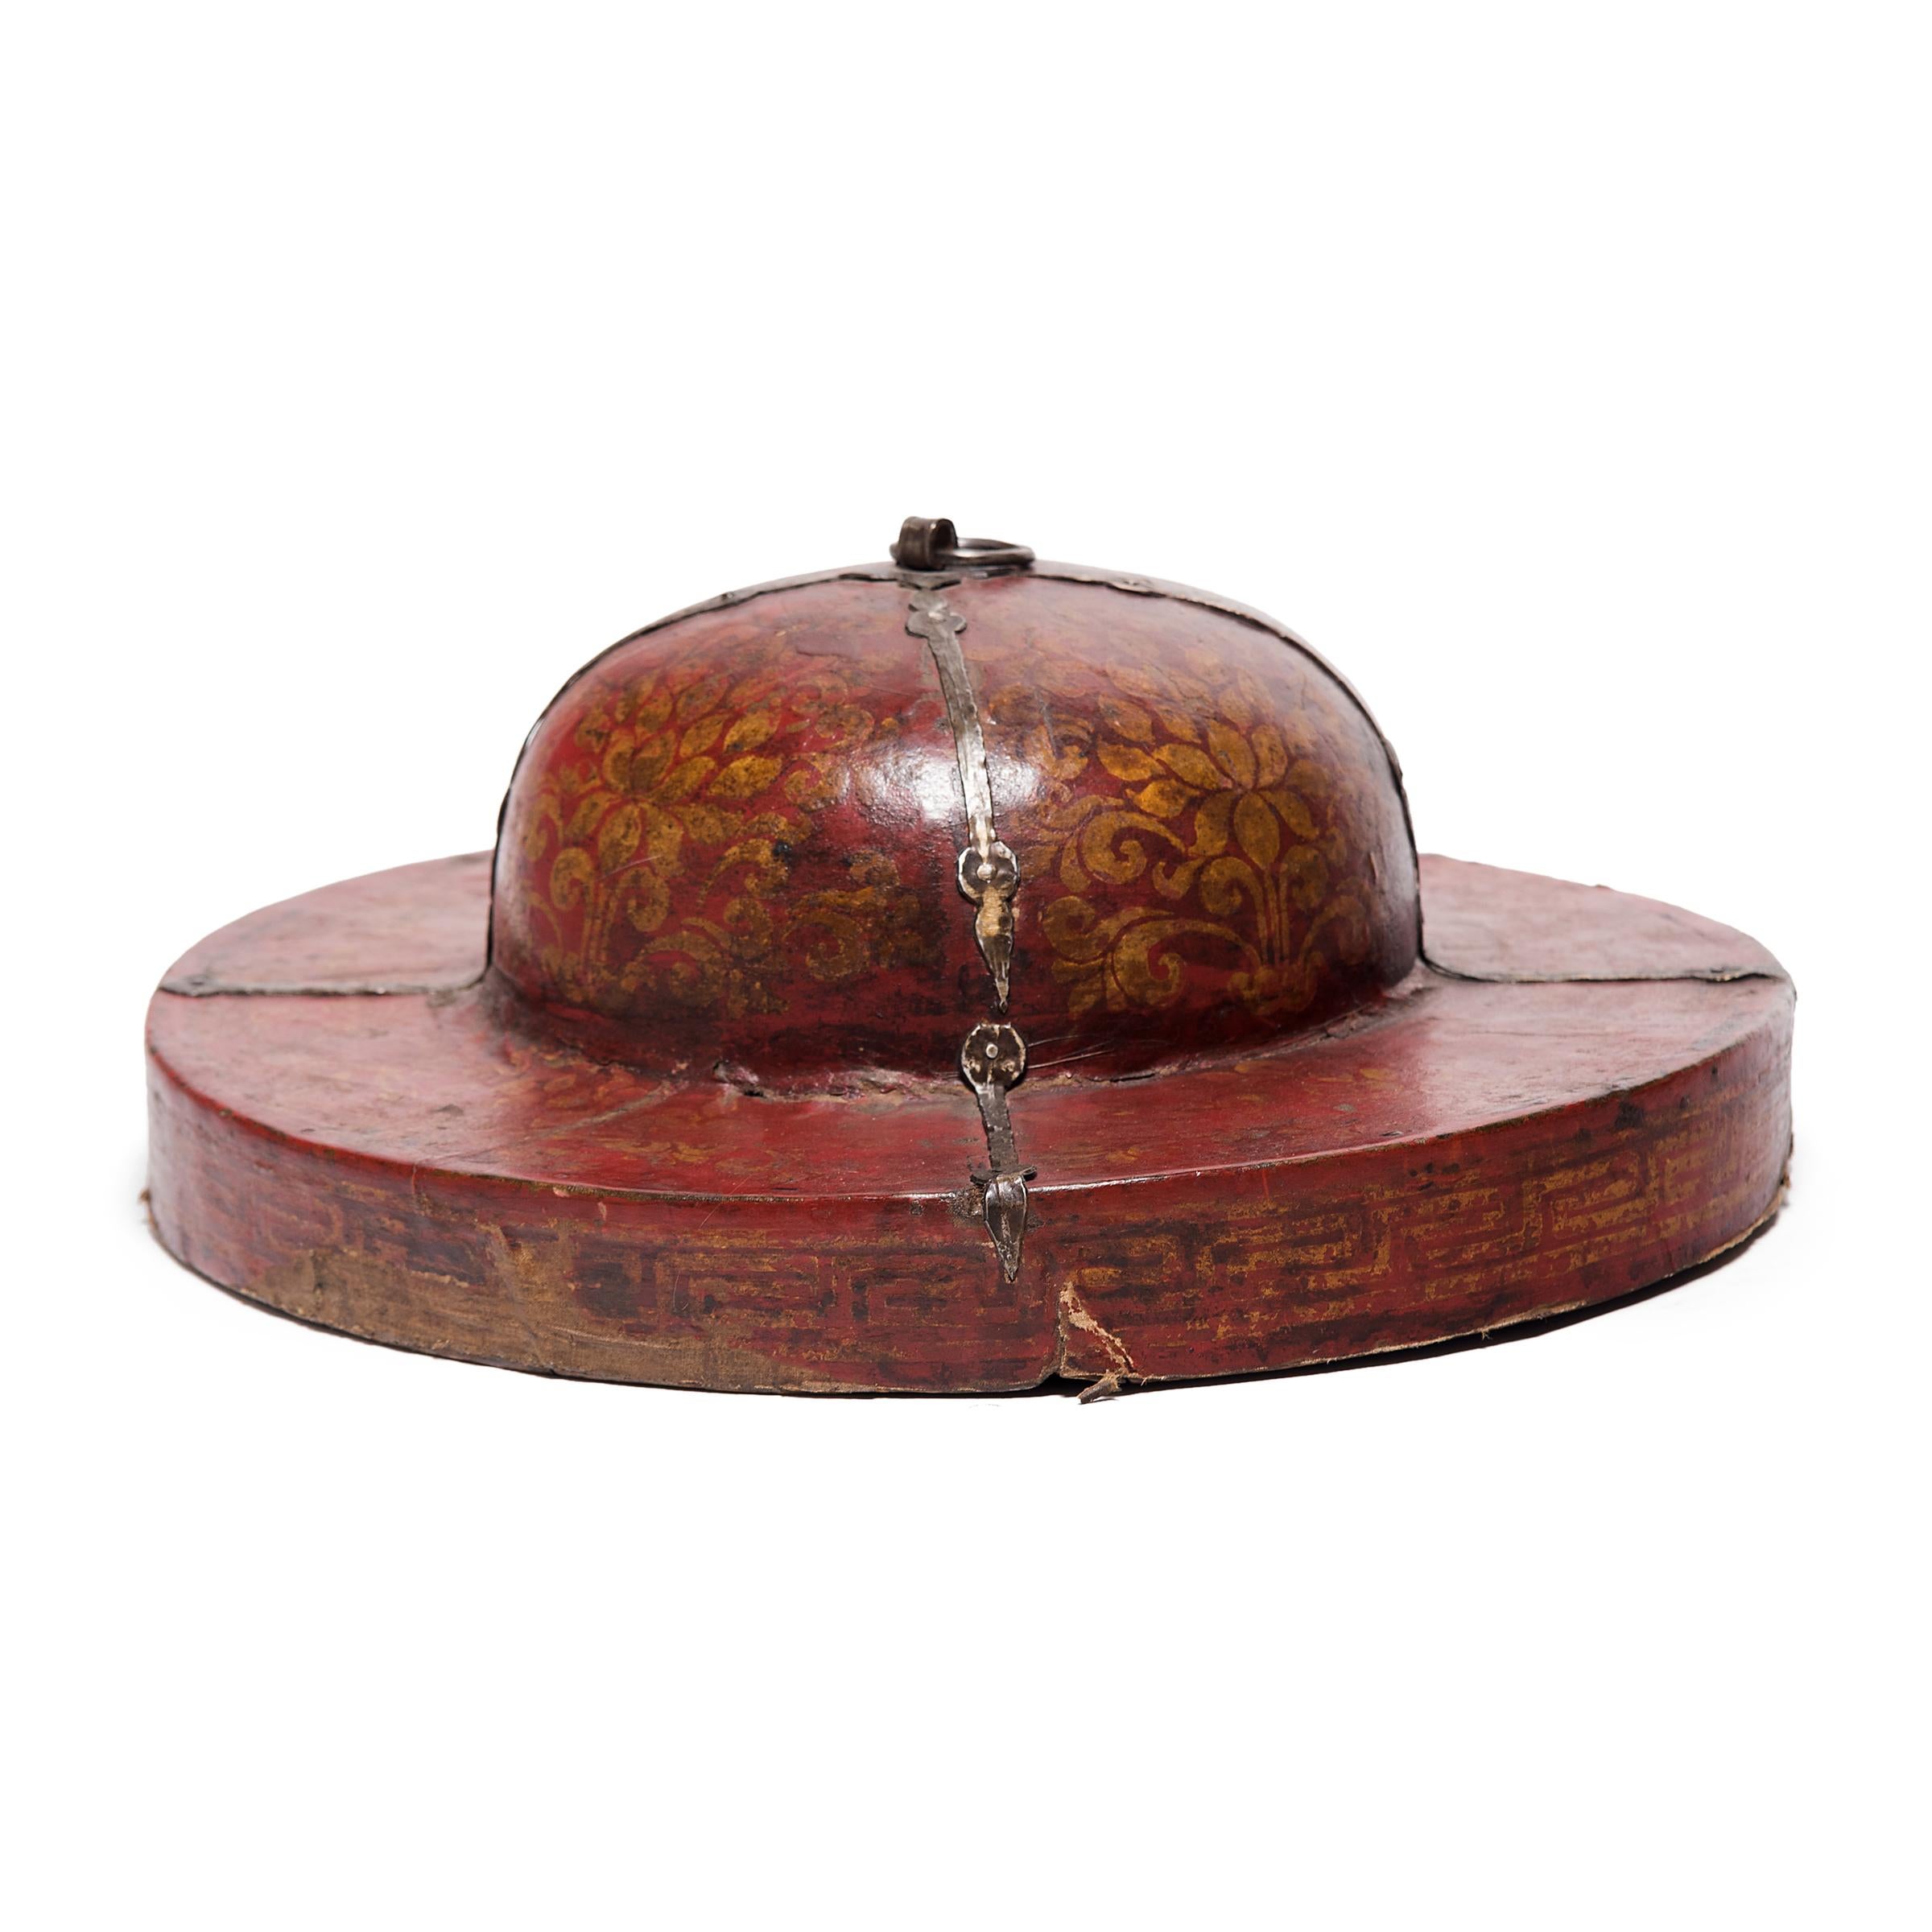 Ornately patterned and framed with brass fittings, this box lid dates to the 19th century originally enclosed a pair of large Tibetan cymbals. Used in processions and dance performances, cymbals provided percussive backing to wind instruments and